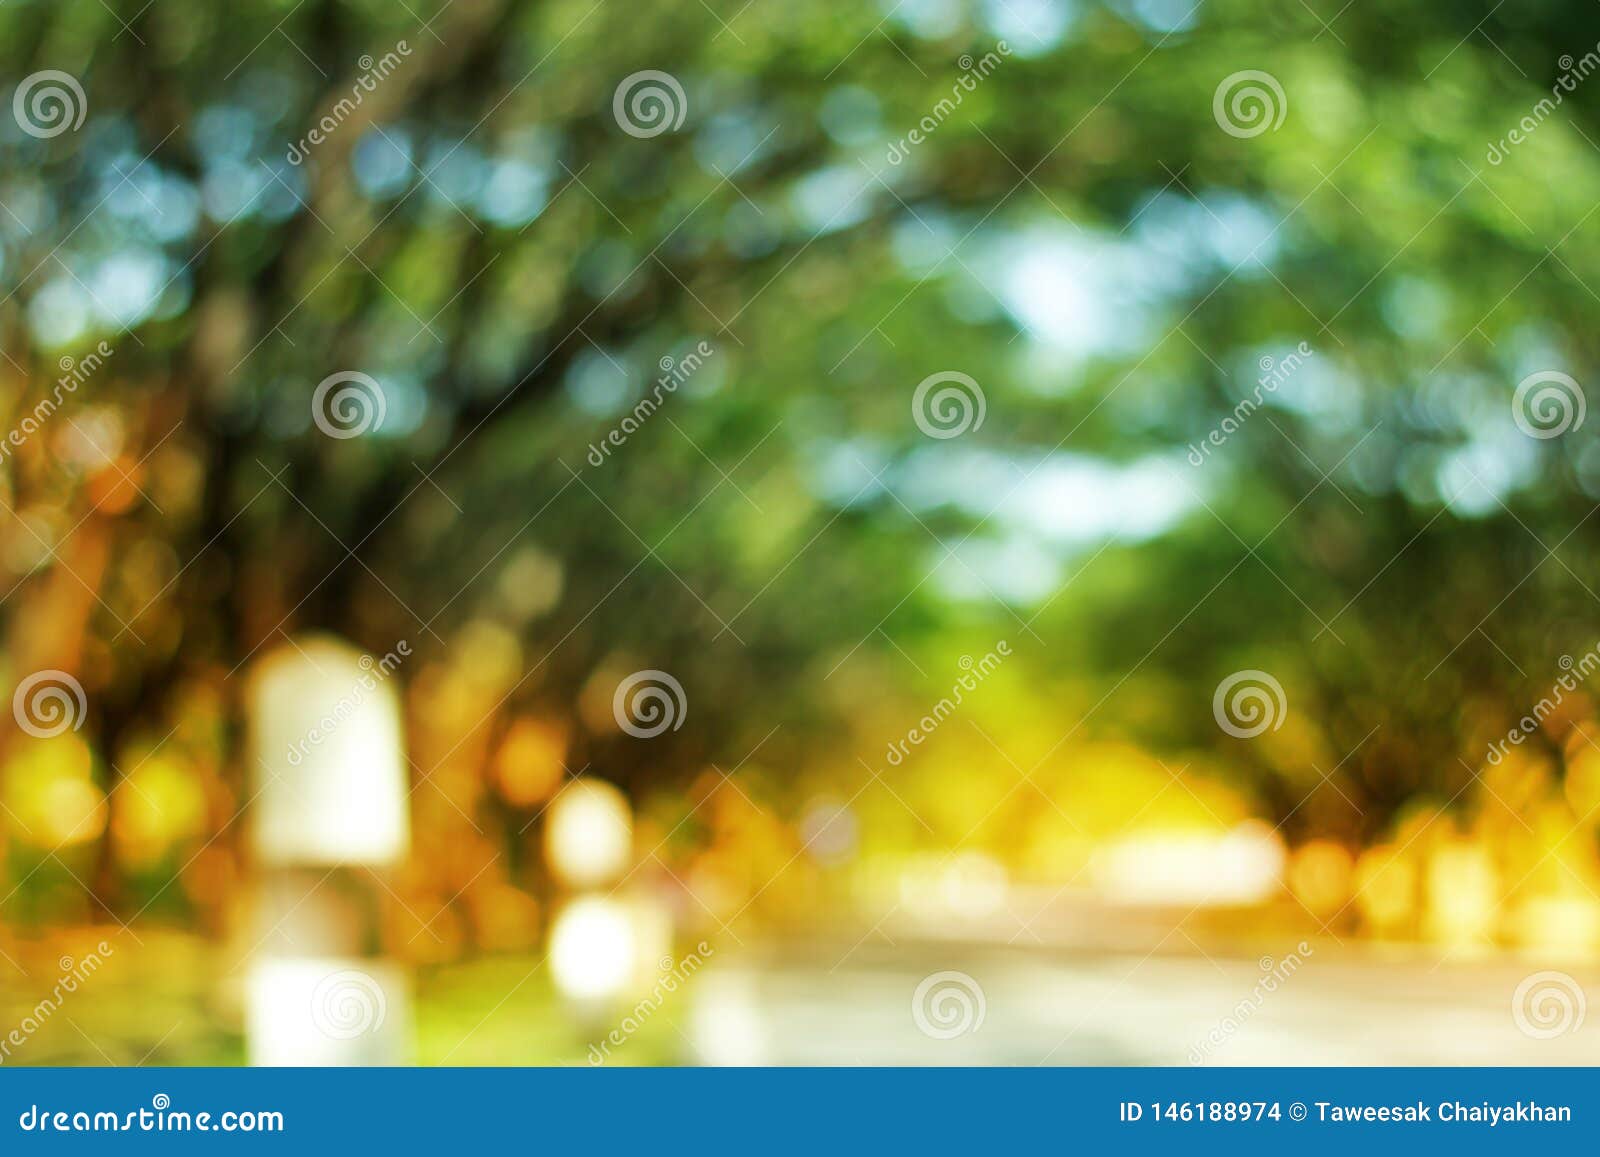 Blurred Tree and Road, the Nature Background Abstract Stock Photo ...